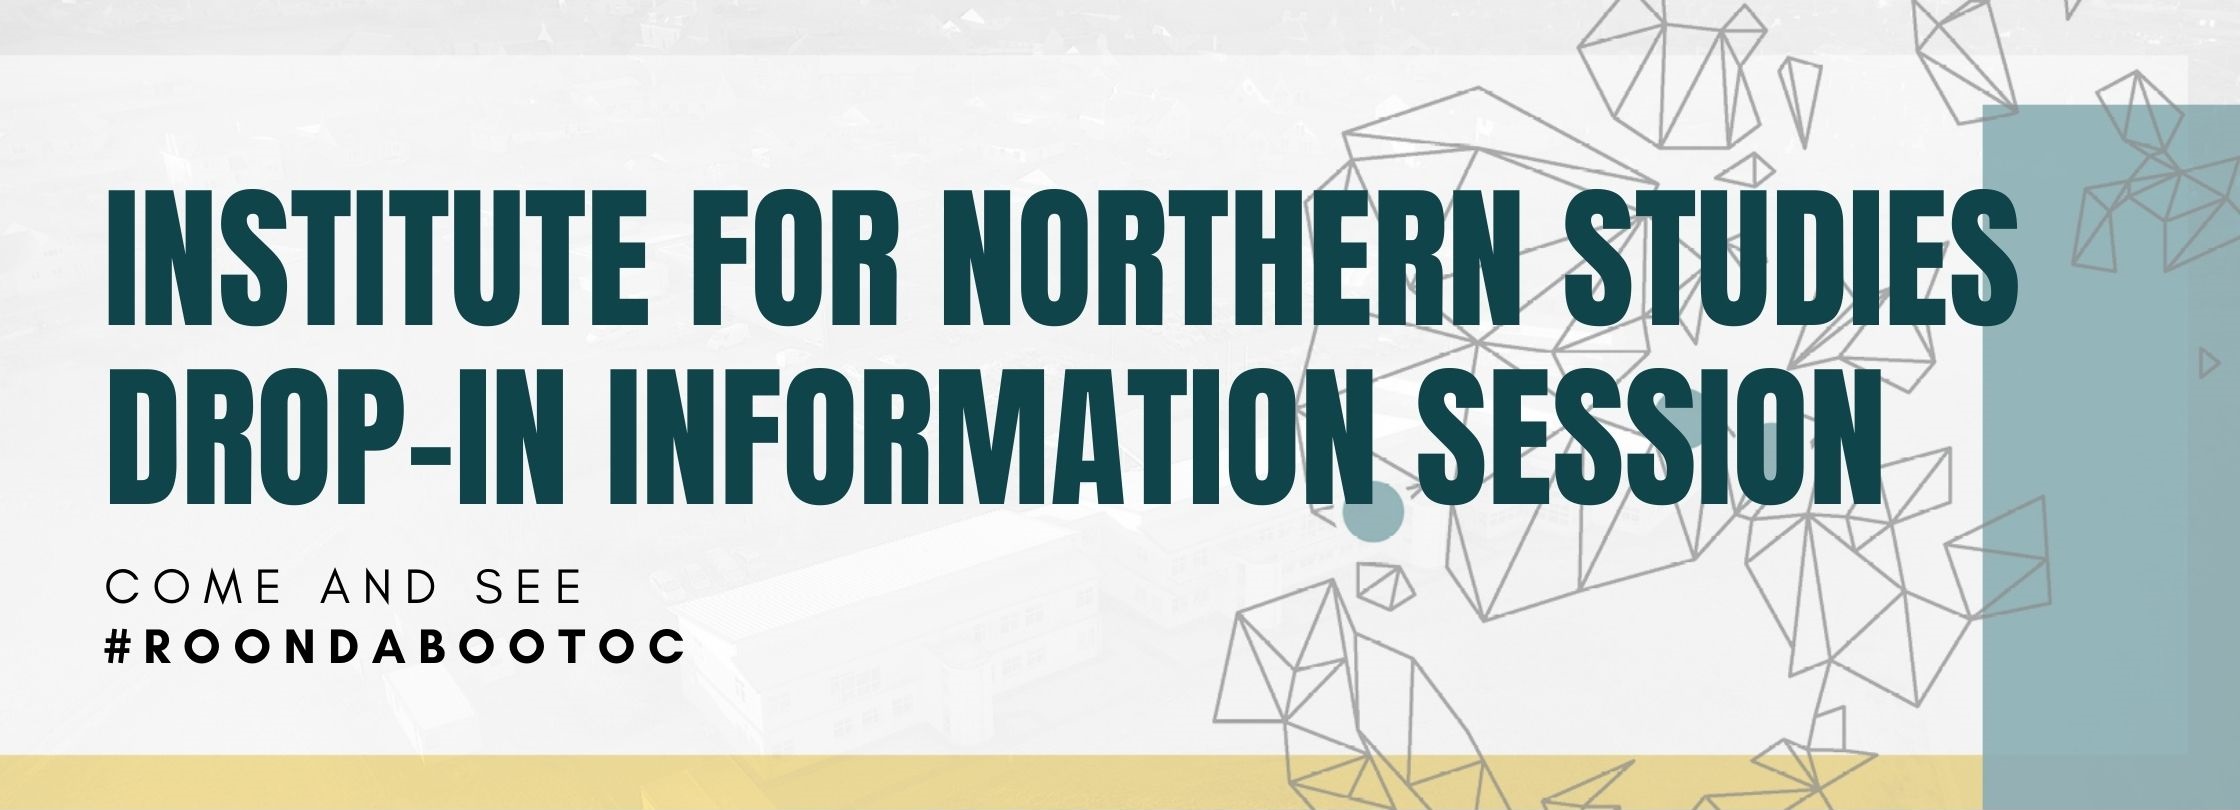 Institute for northern studies drop-in information session | Come and see | roondabootoc